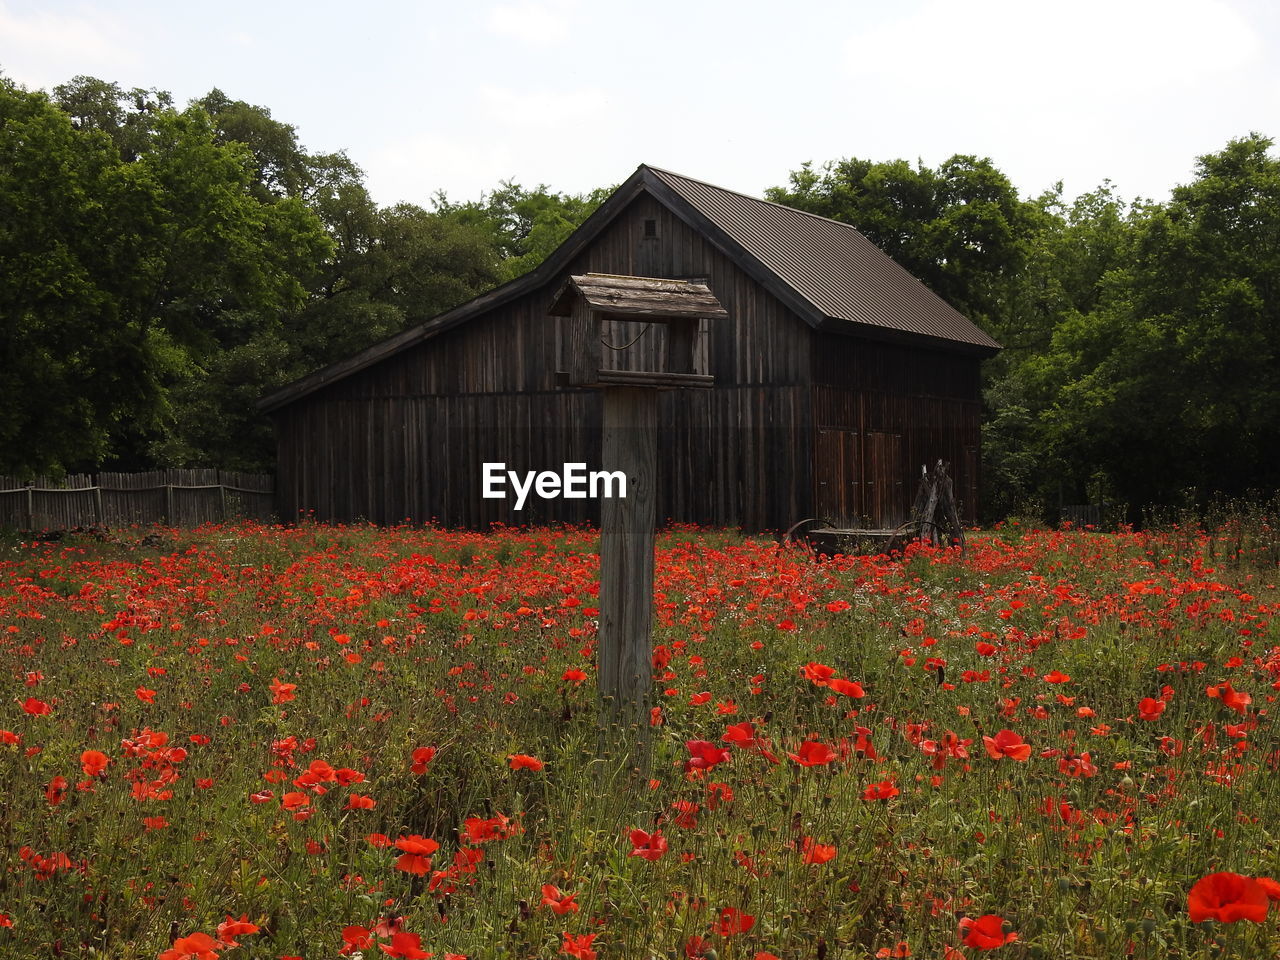 Red poppies blooming by barn on field